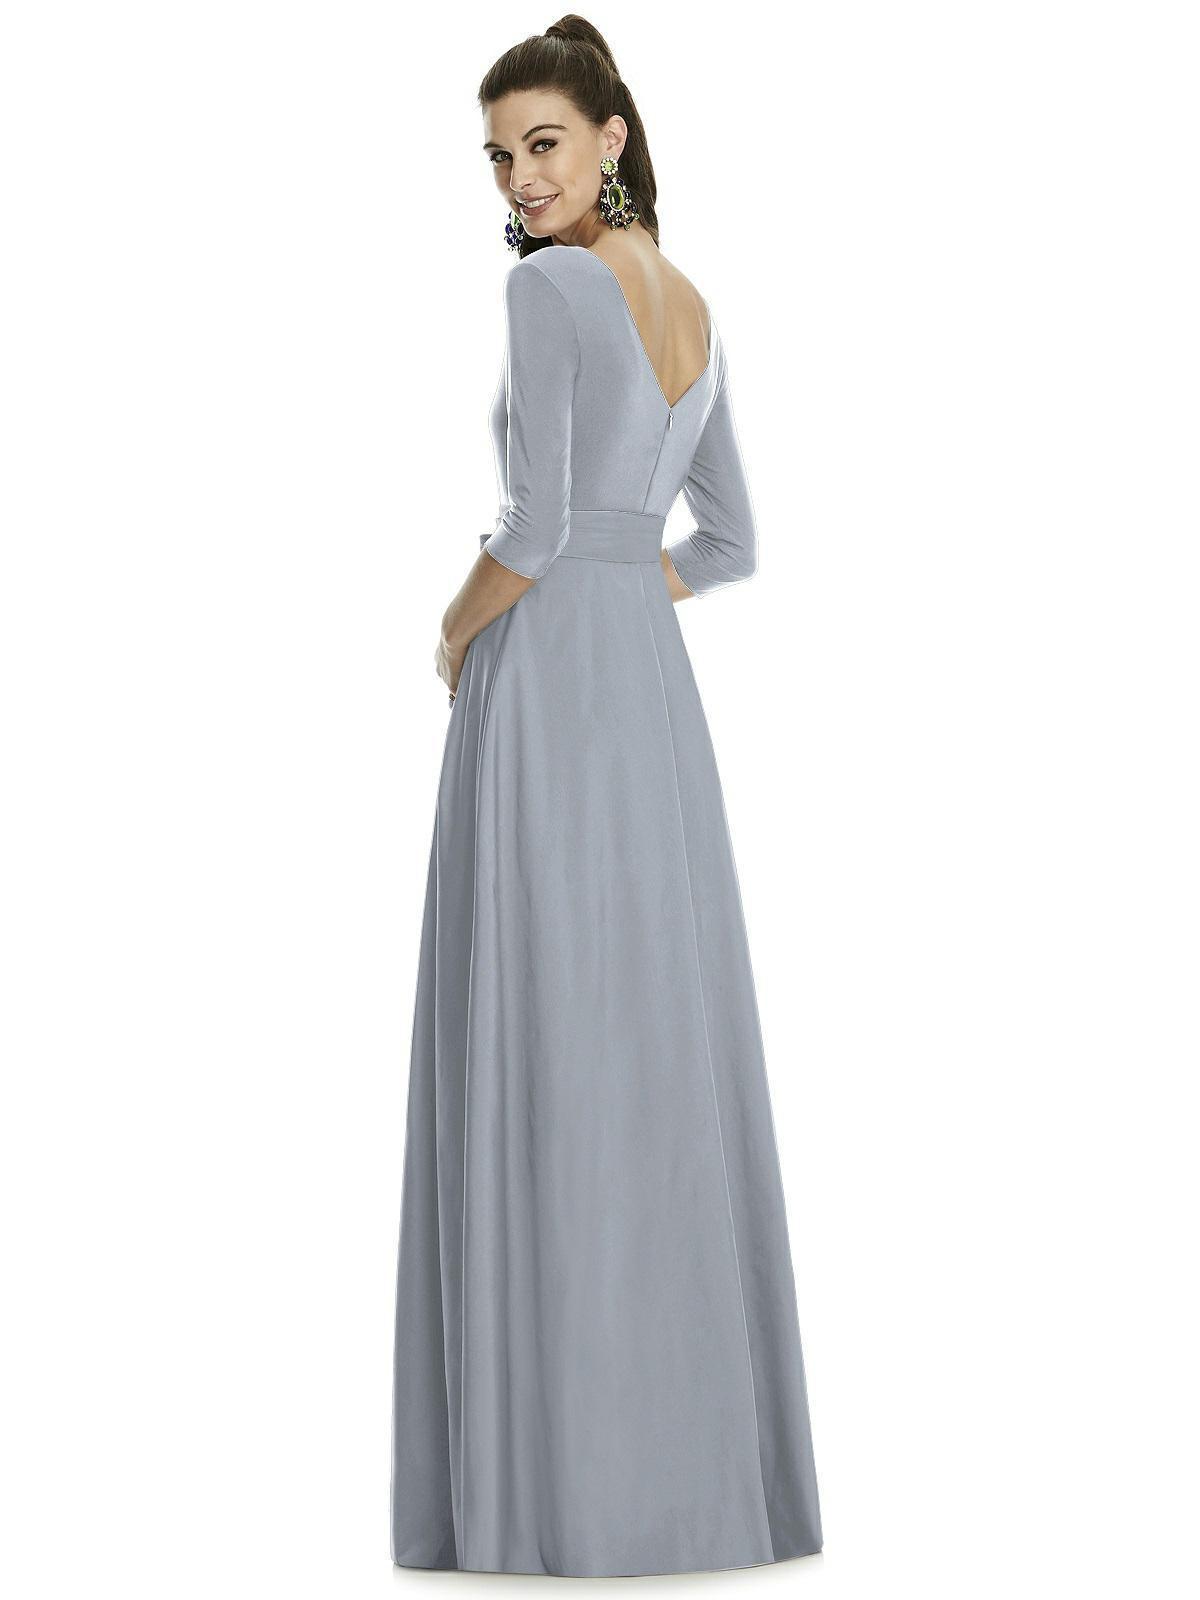 Alfred Sung - D736 Quarter Sleeve V Neck Long Formal Dress with Sash In Silver and Gray